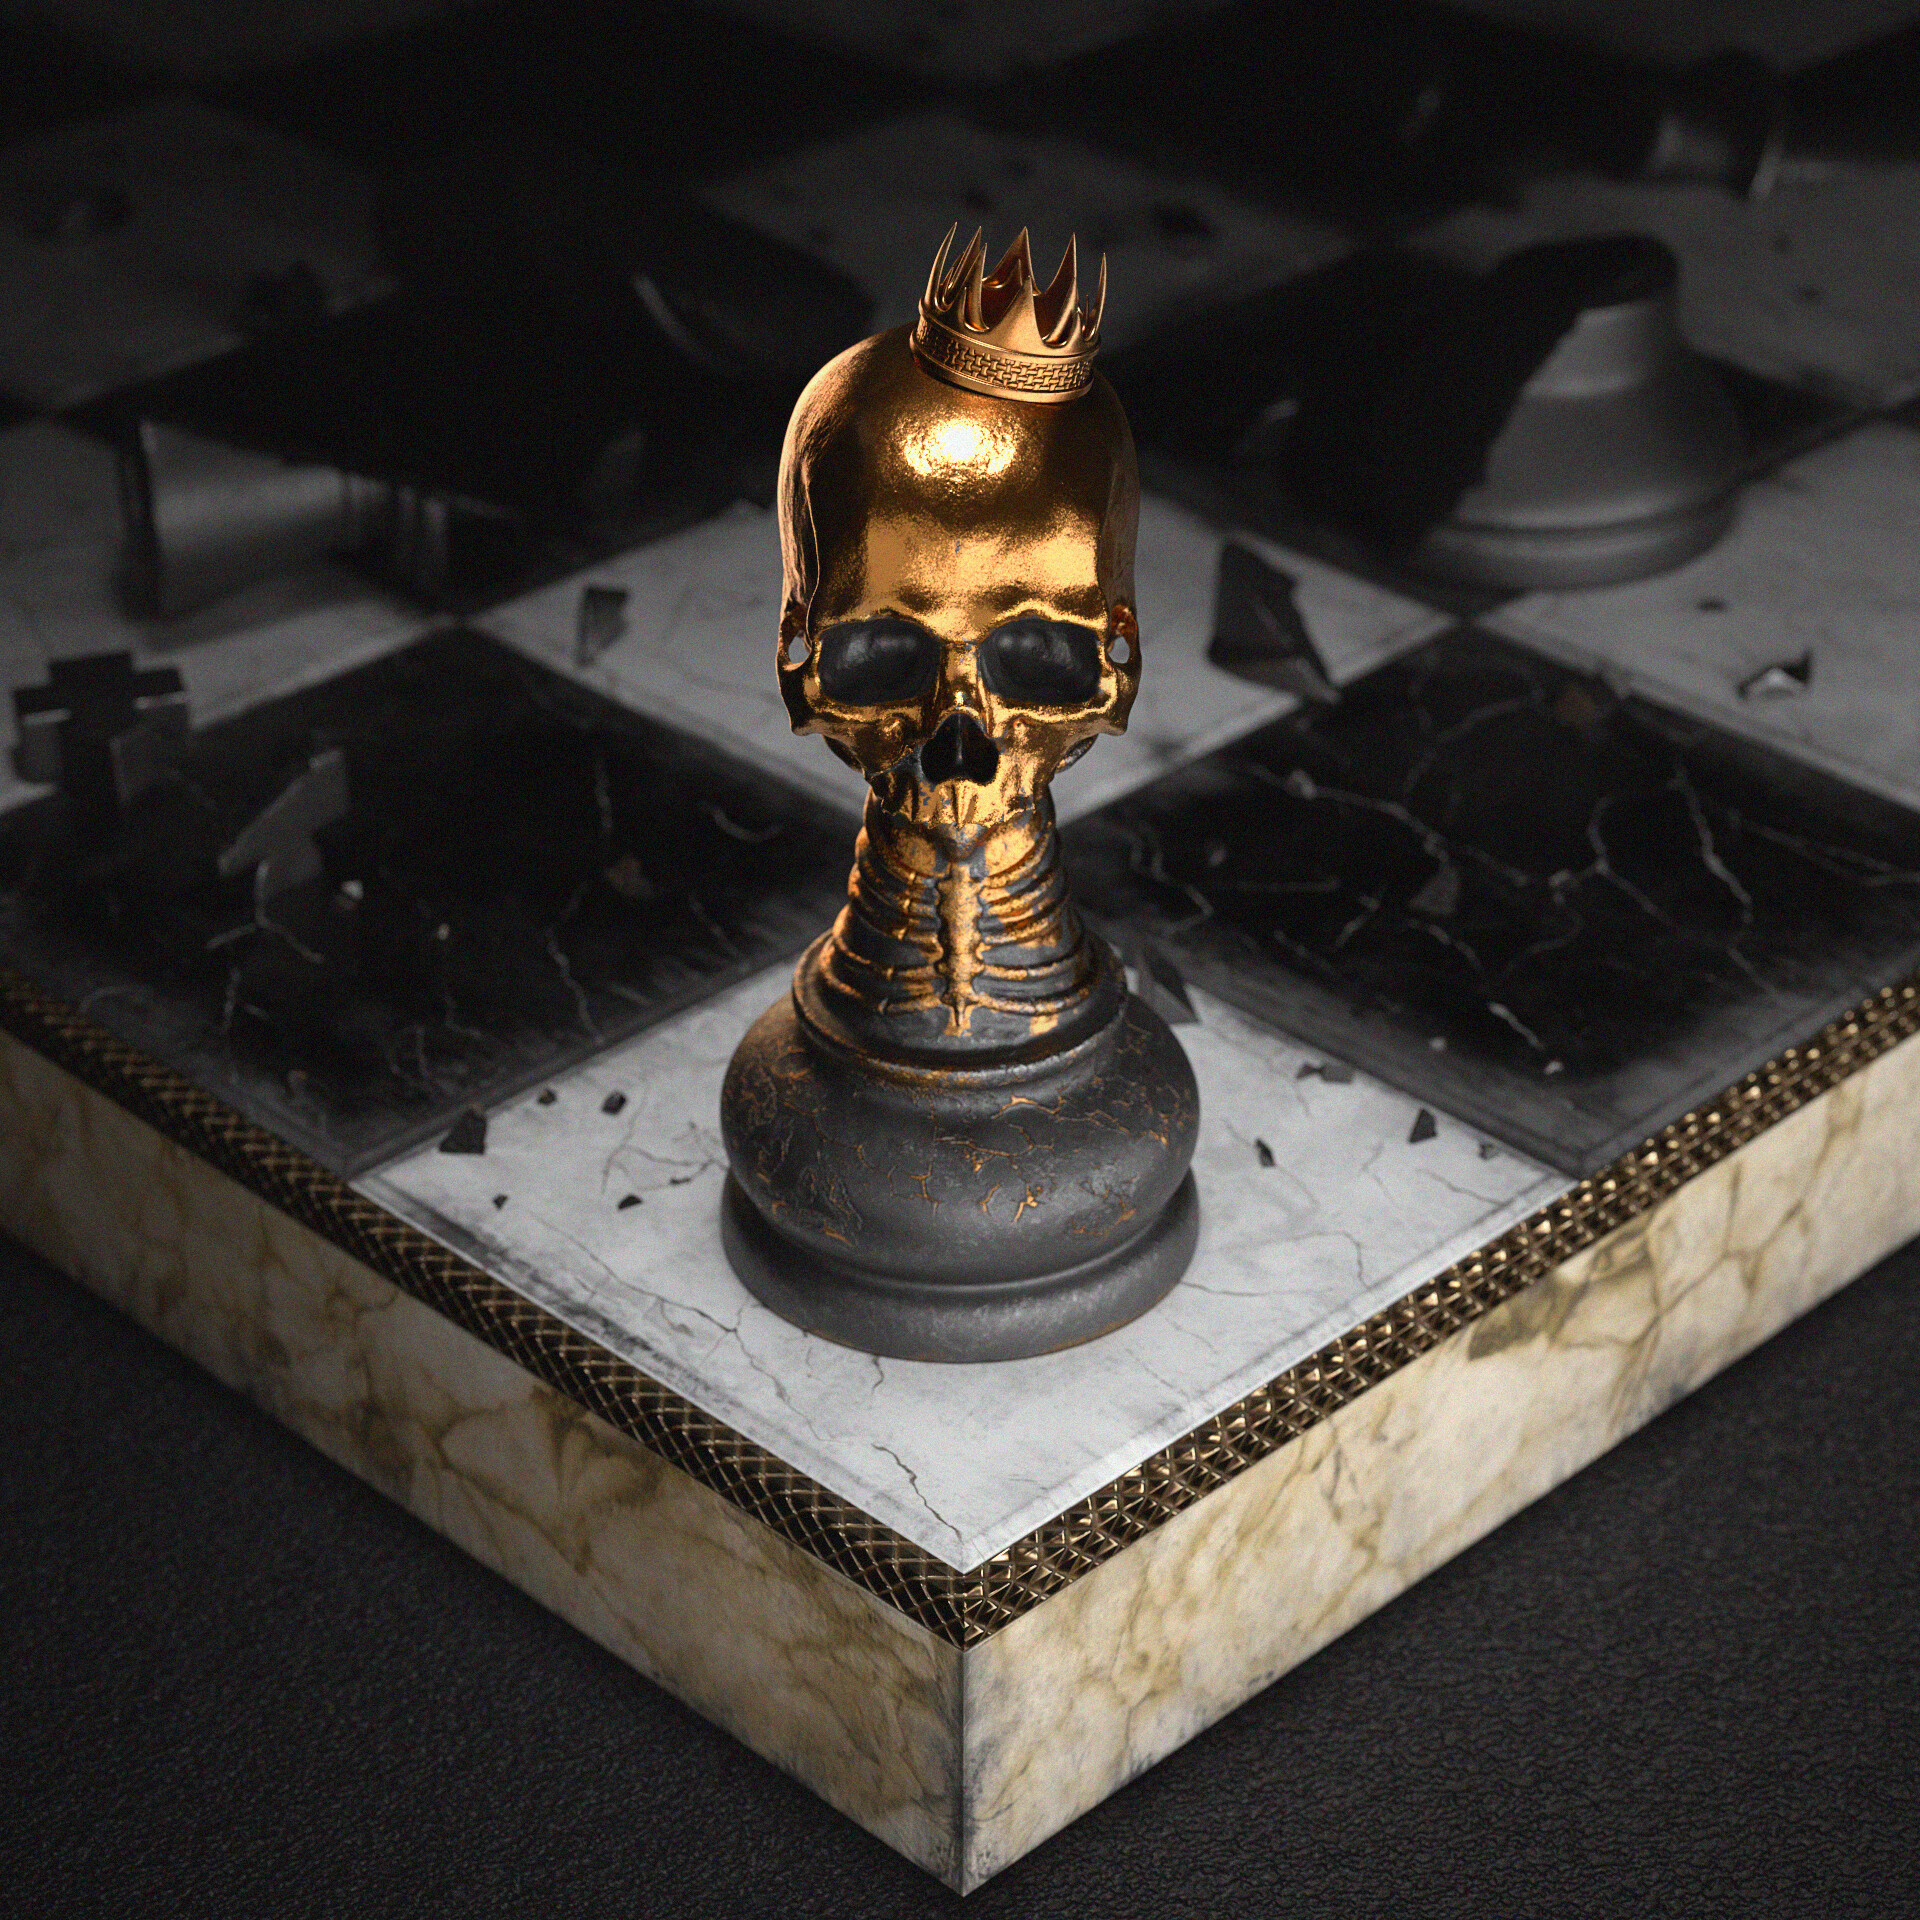 Kings or Pawns